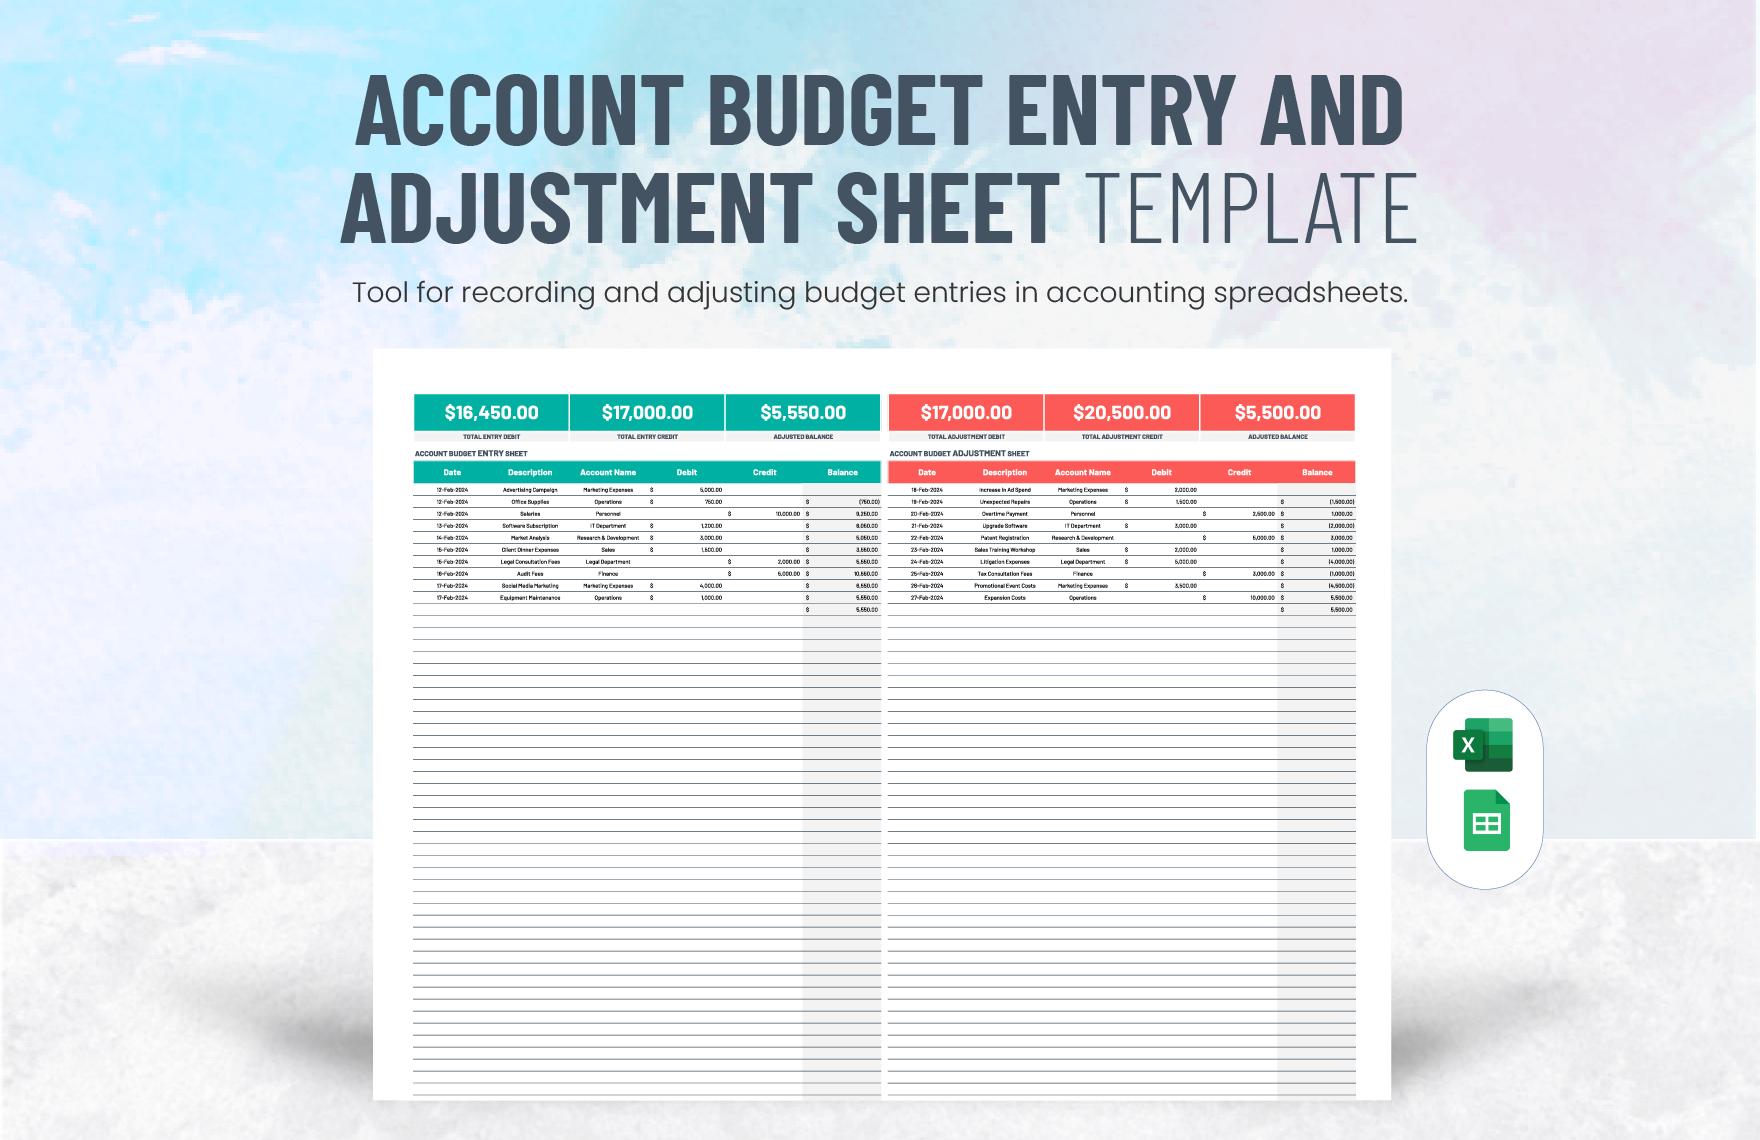 Account Budget Entry and Adjustment Sheet Template in Excel, Google Sheets